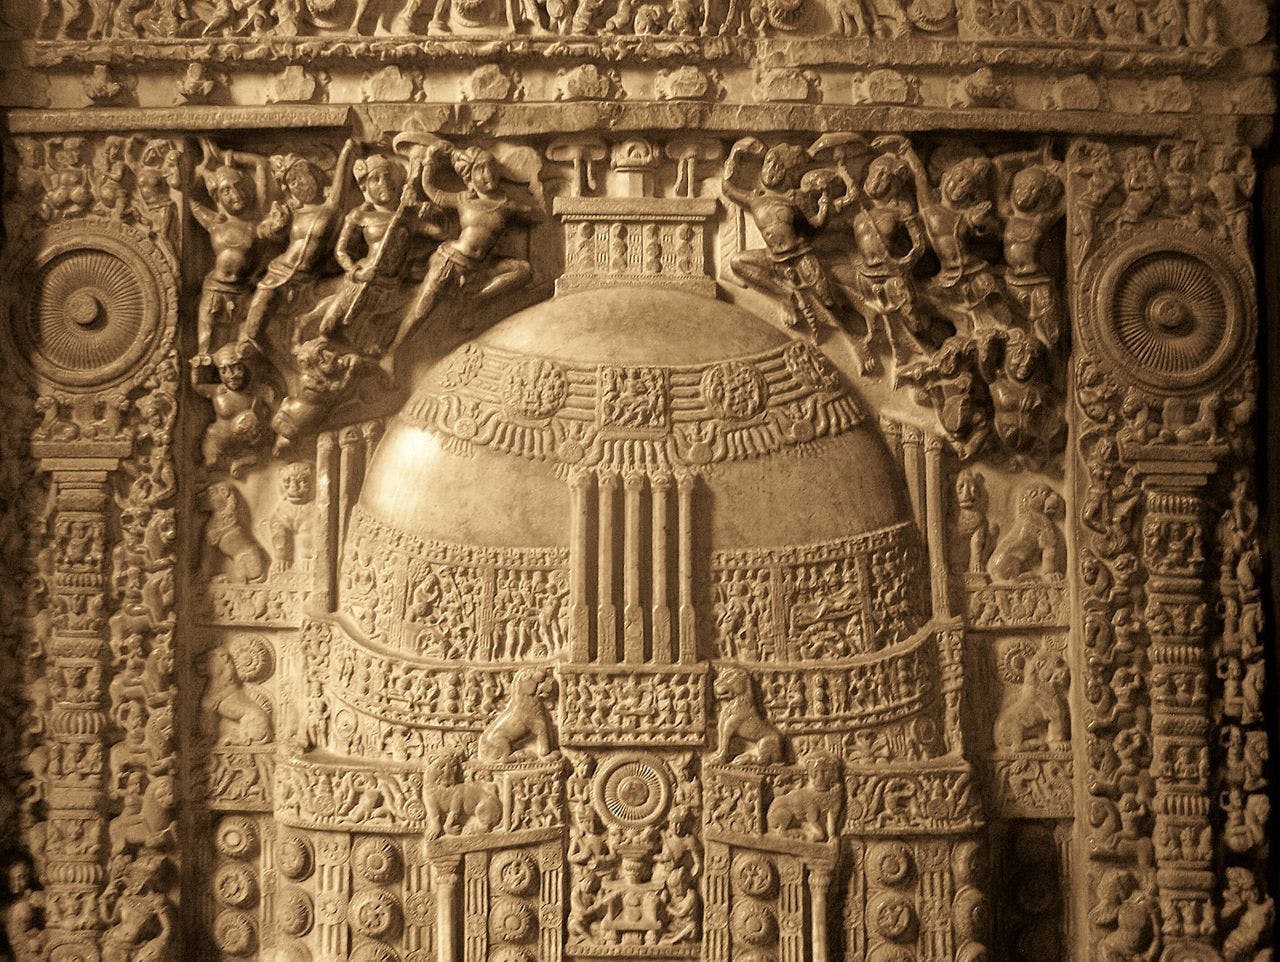 Relief from the side of the Amaravati stupa, now at the Government Museum in Chennai